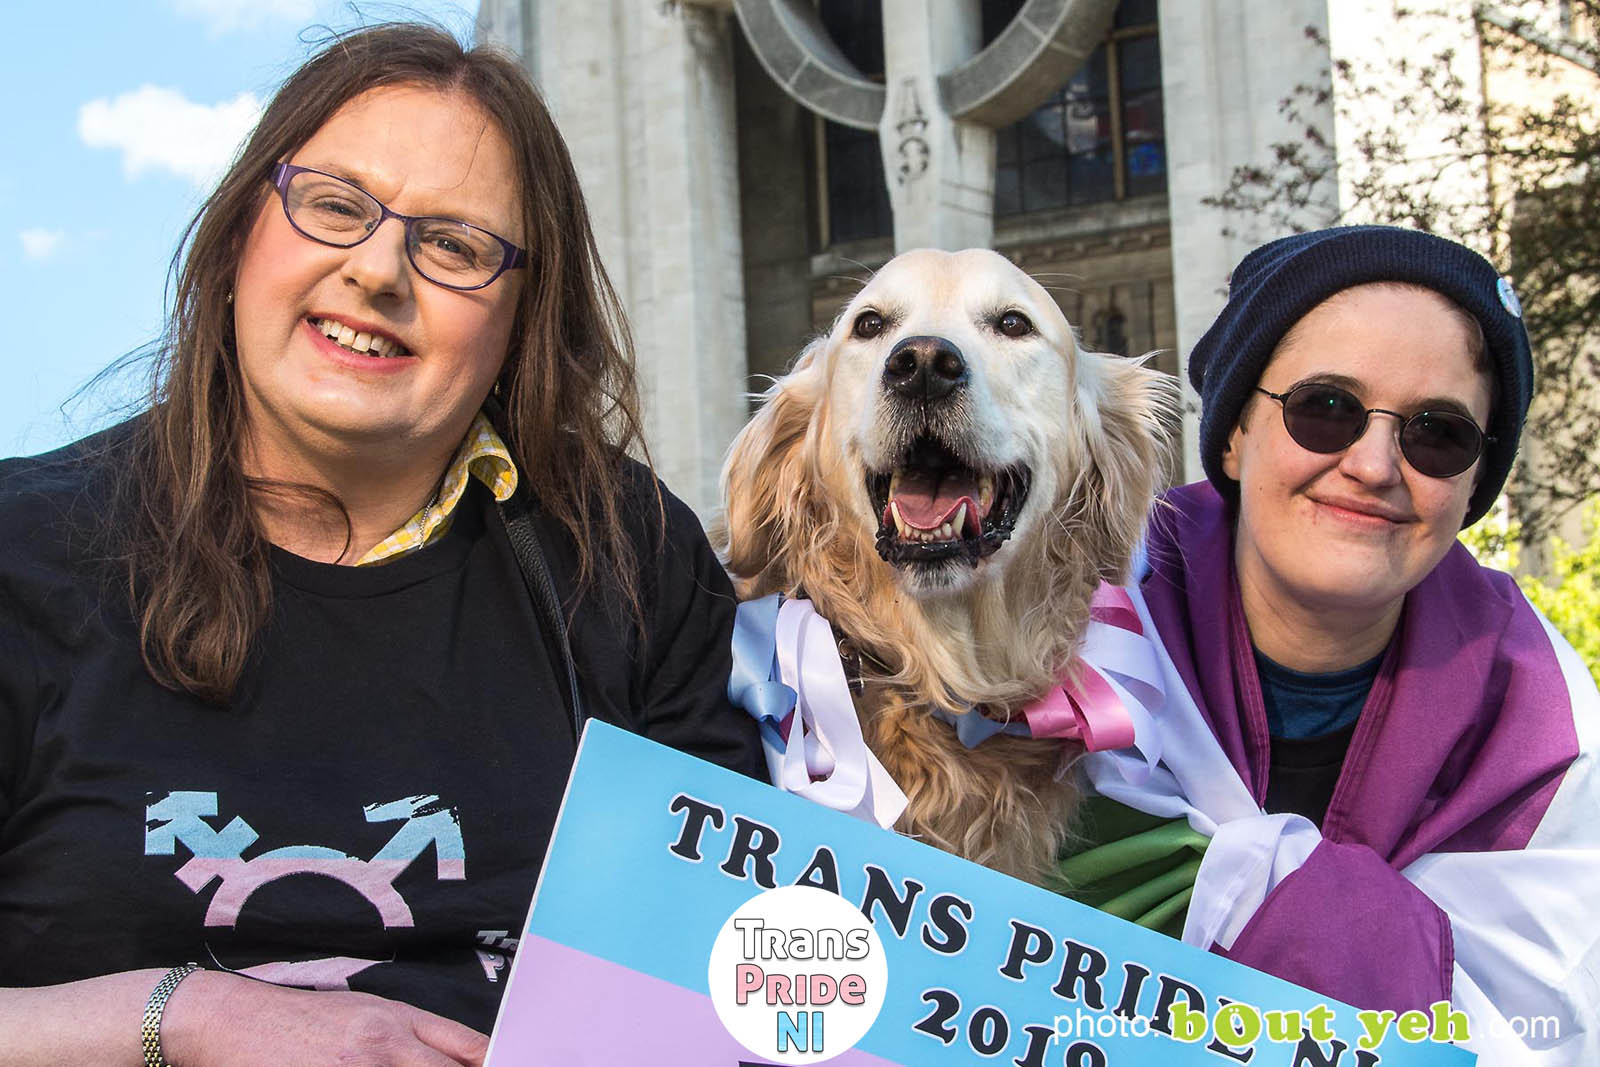 Social Media Marketing Consultants Belfast - Trans Pride NI campaign photo 7719. Photo by Bout Yeh used in a Social Media Marketing campaign across Bout Yeh's Social Media platforms for the Trans Pride NI Festival in Northern Ireland.